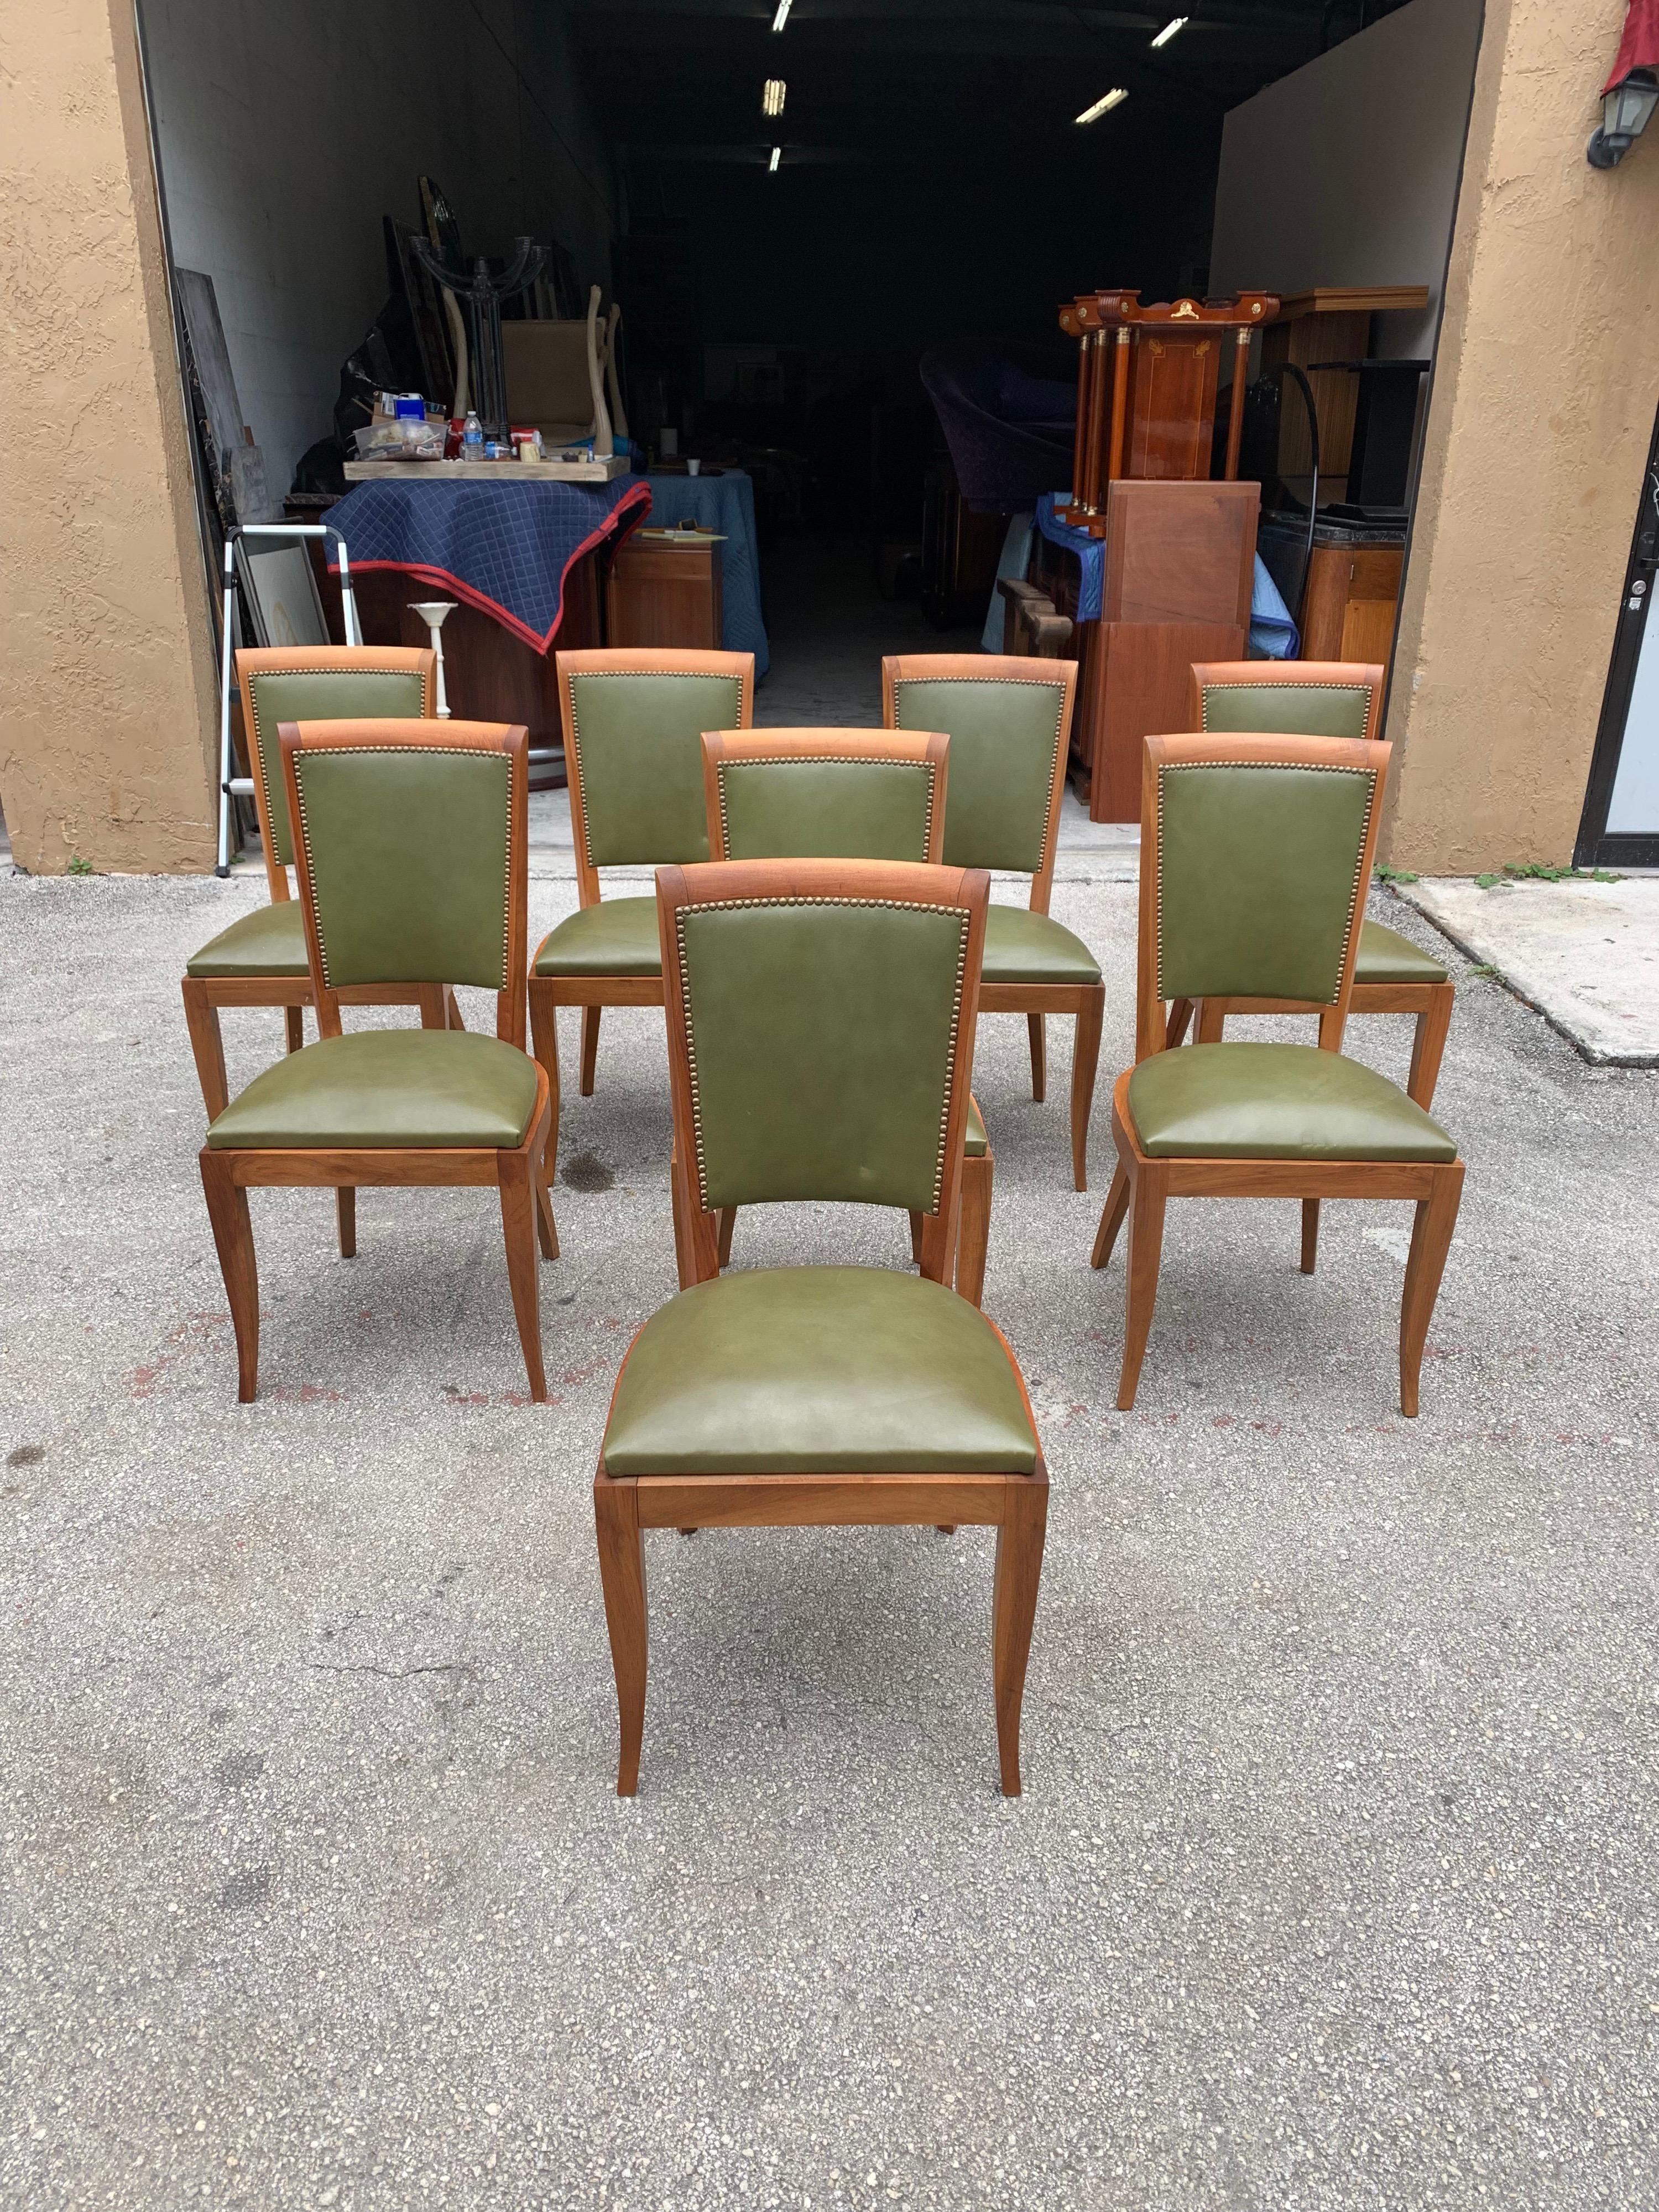 Classic set of 8 French Art Deco dining chairs solid mahogany, the chair frames are in excellent condition. The green leather color is original in very good condition. We travelled to buy all our pieces in France. We bought this beautiful set of 8